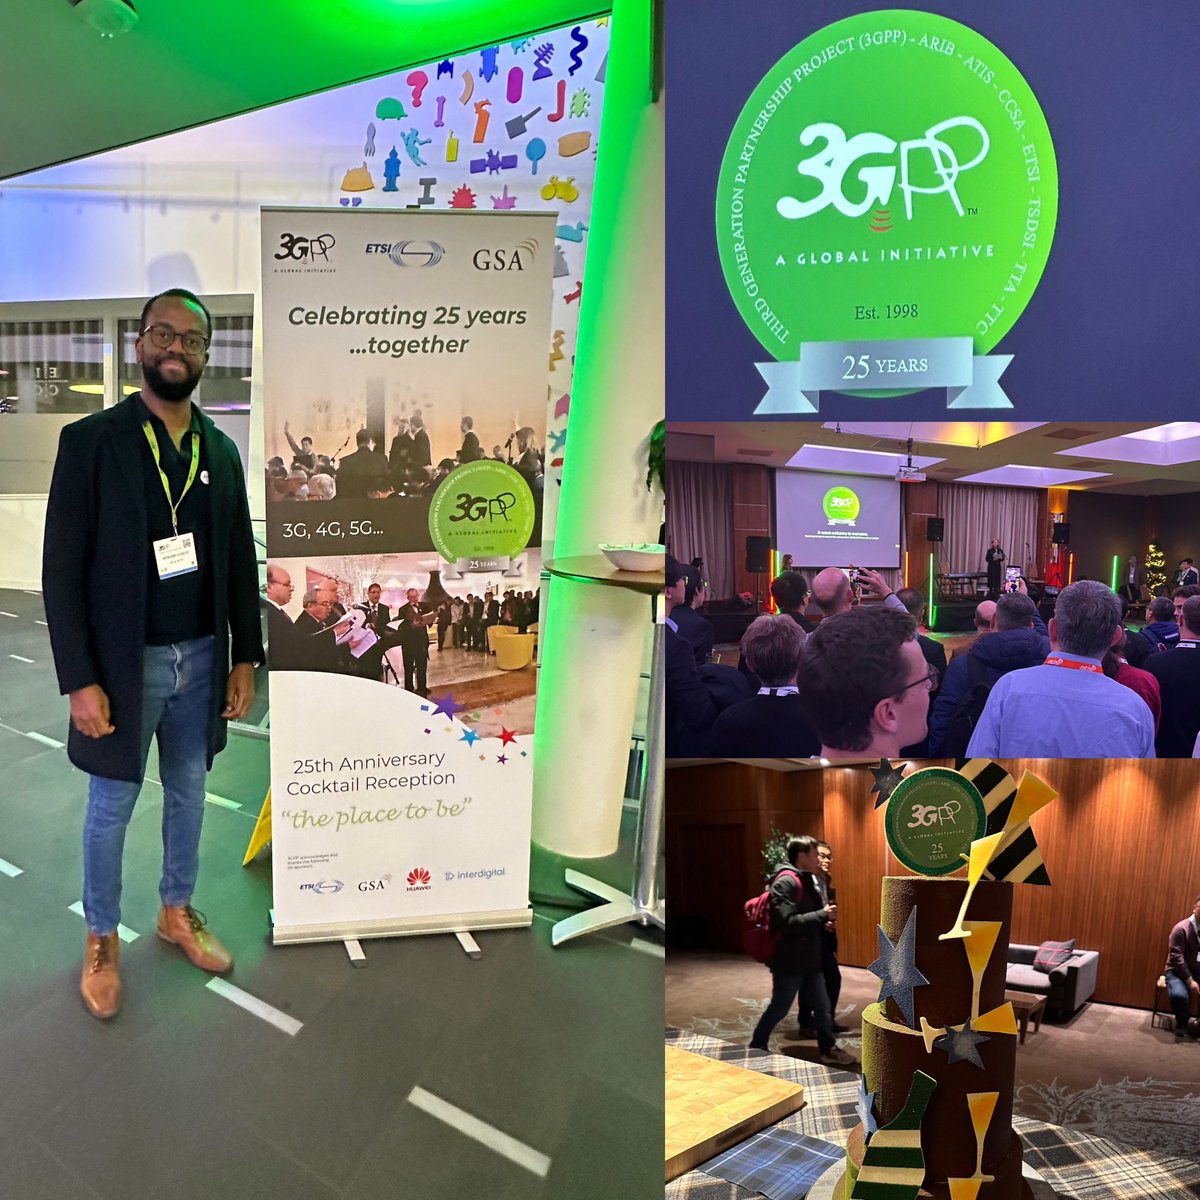 It’s been a significant week of milestones at the @3GPPLive TSG Plenary#102 Edinburgh. The meeting saw the Rel-19 requirements Stage 1 freeze and the Rel-19 Stage 2 package approval. The TSG leadership also provided an early view of the 3GPP timeline for IMT-2030. #3GPP@25